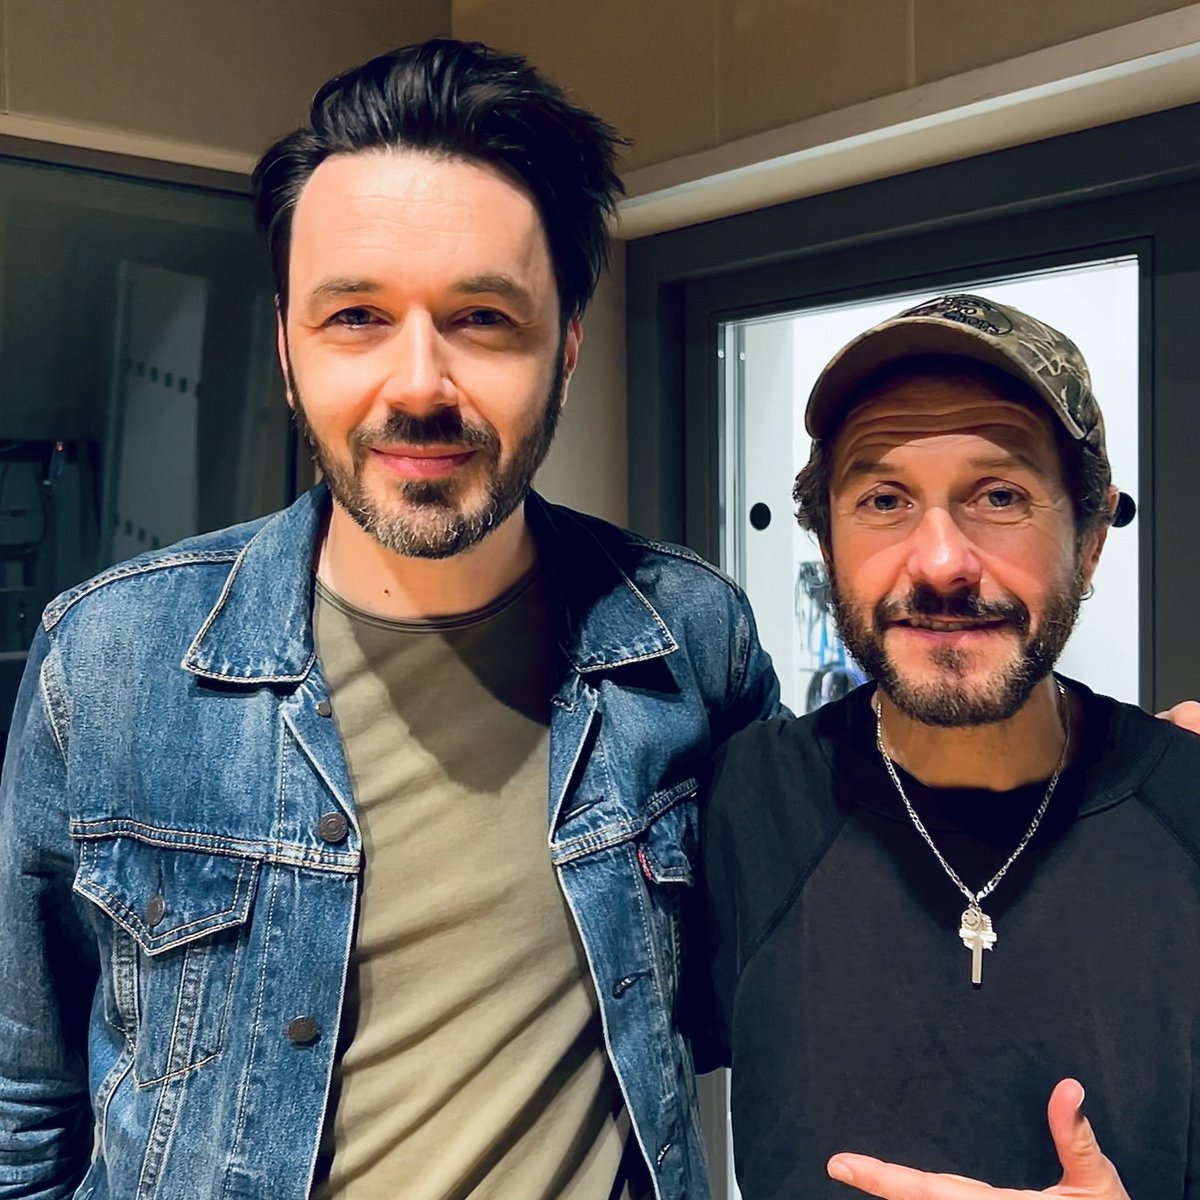 Tonight on the #bbcquaysessions we are joined by @FeederHQ for a very special acoustic set. I chat to Grant Nicholas about the band’s 30 year career, the new album Black/Red and loads more. 8pm @bbcradioscot and @bbcsounds